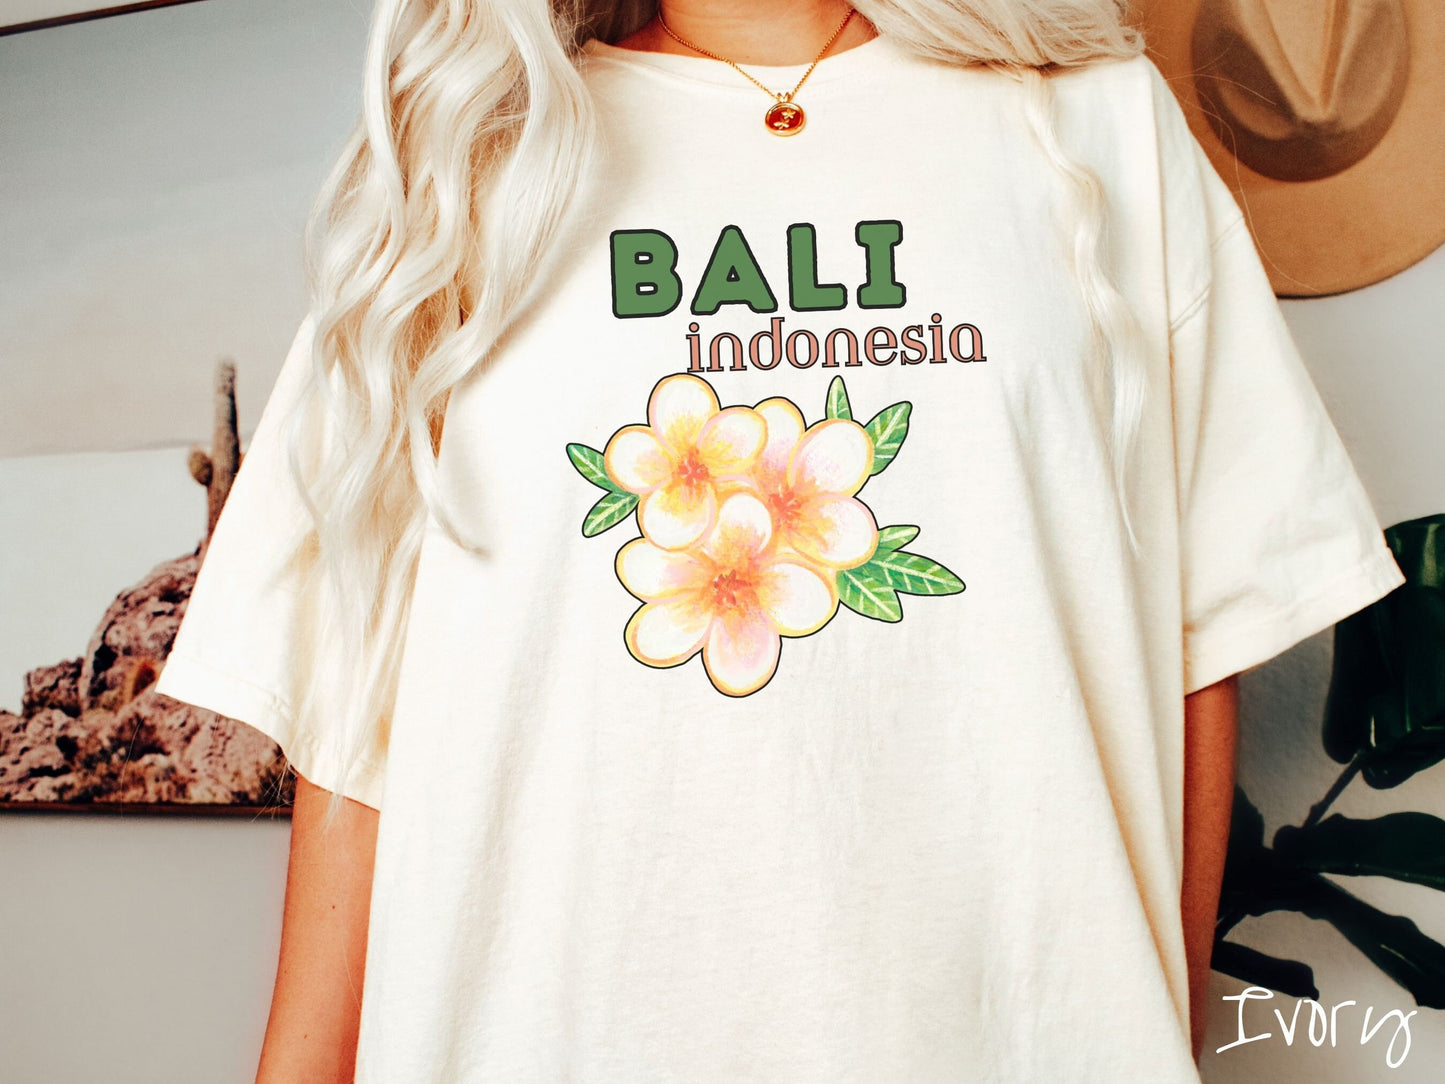 A woman wearing a vintage, ivory colored shirt with the text Bali Indonesia in green and yellow font, respectively, and a picture underneath of three beautiful yellow and orange flowers with green leaves.